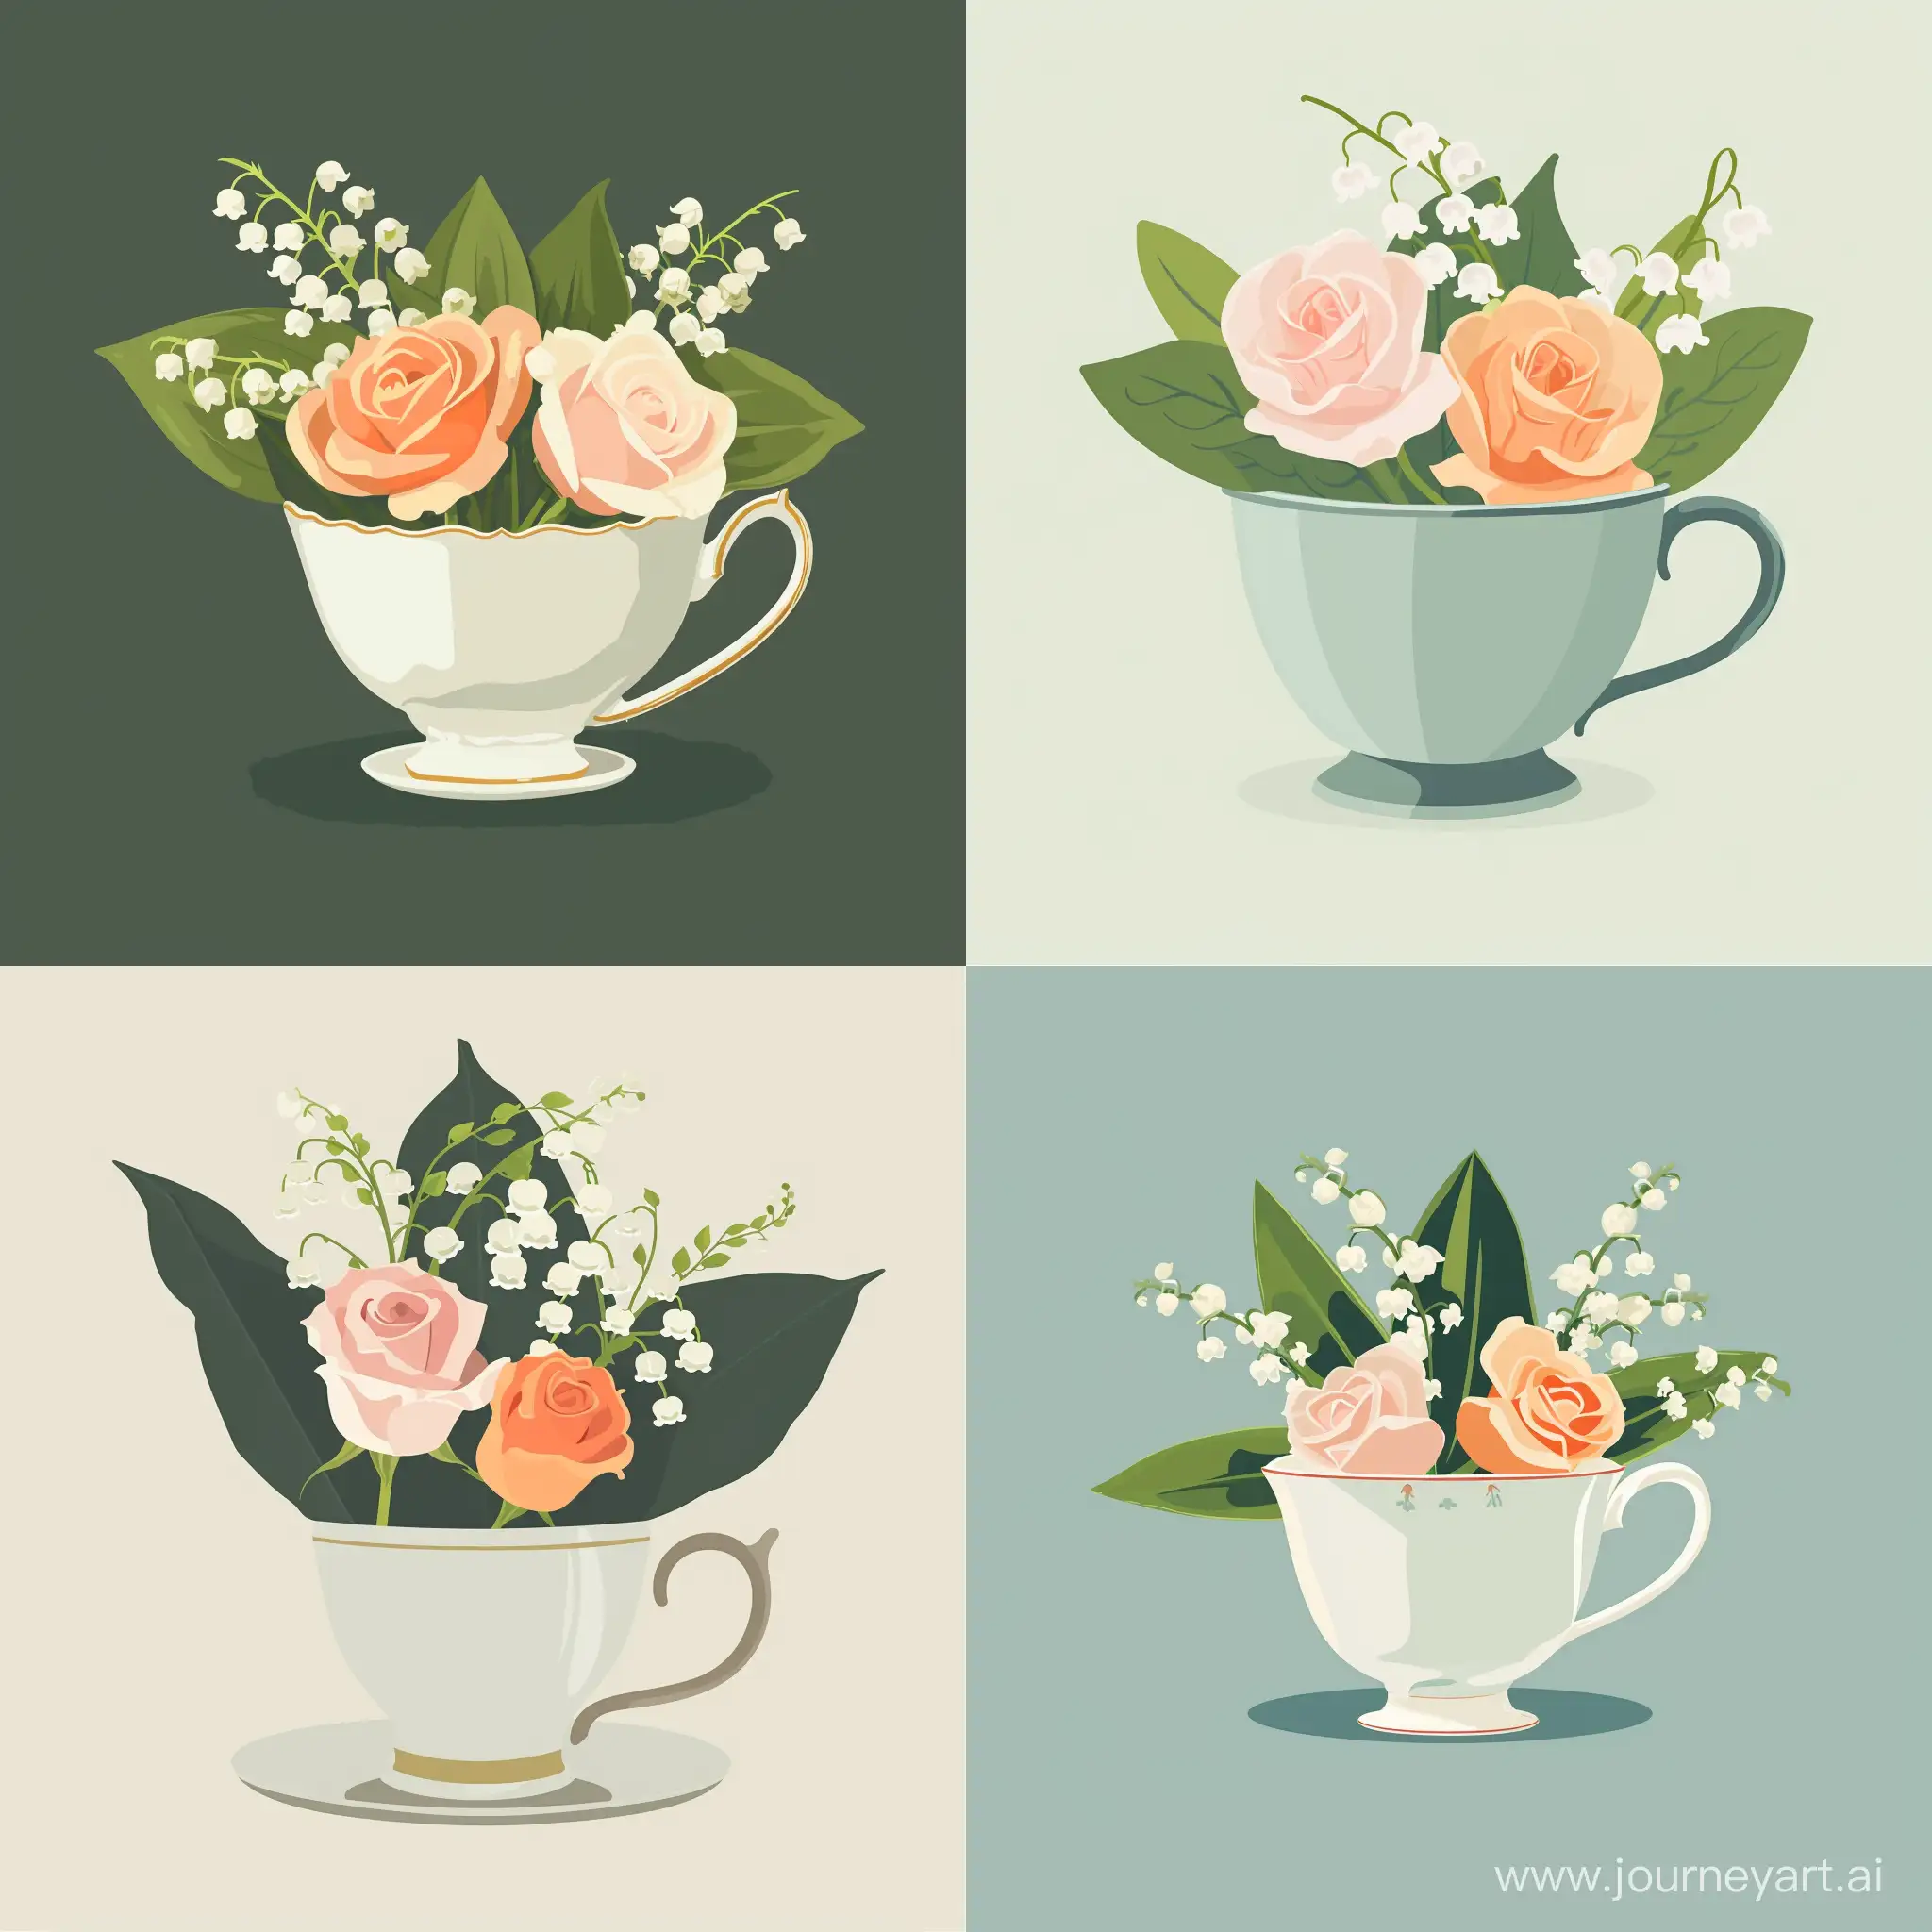 Elegant-Teacup-with-Lily-of-the-Valley-and-Roses-Floral-Arrangement